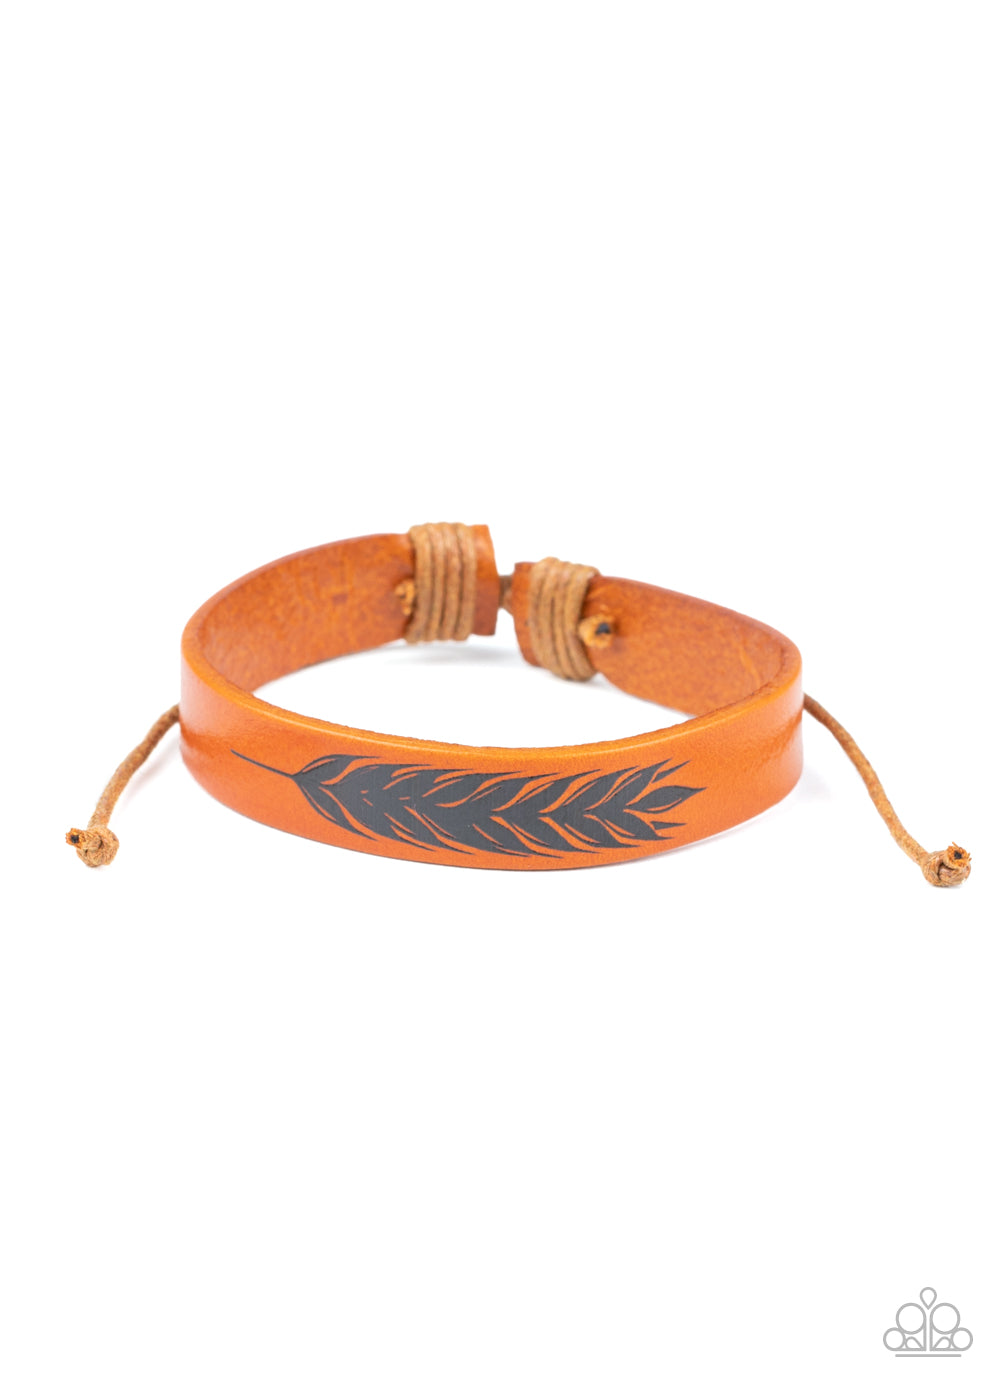 This QUILL All Be Yours - Brown Bracelet